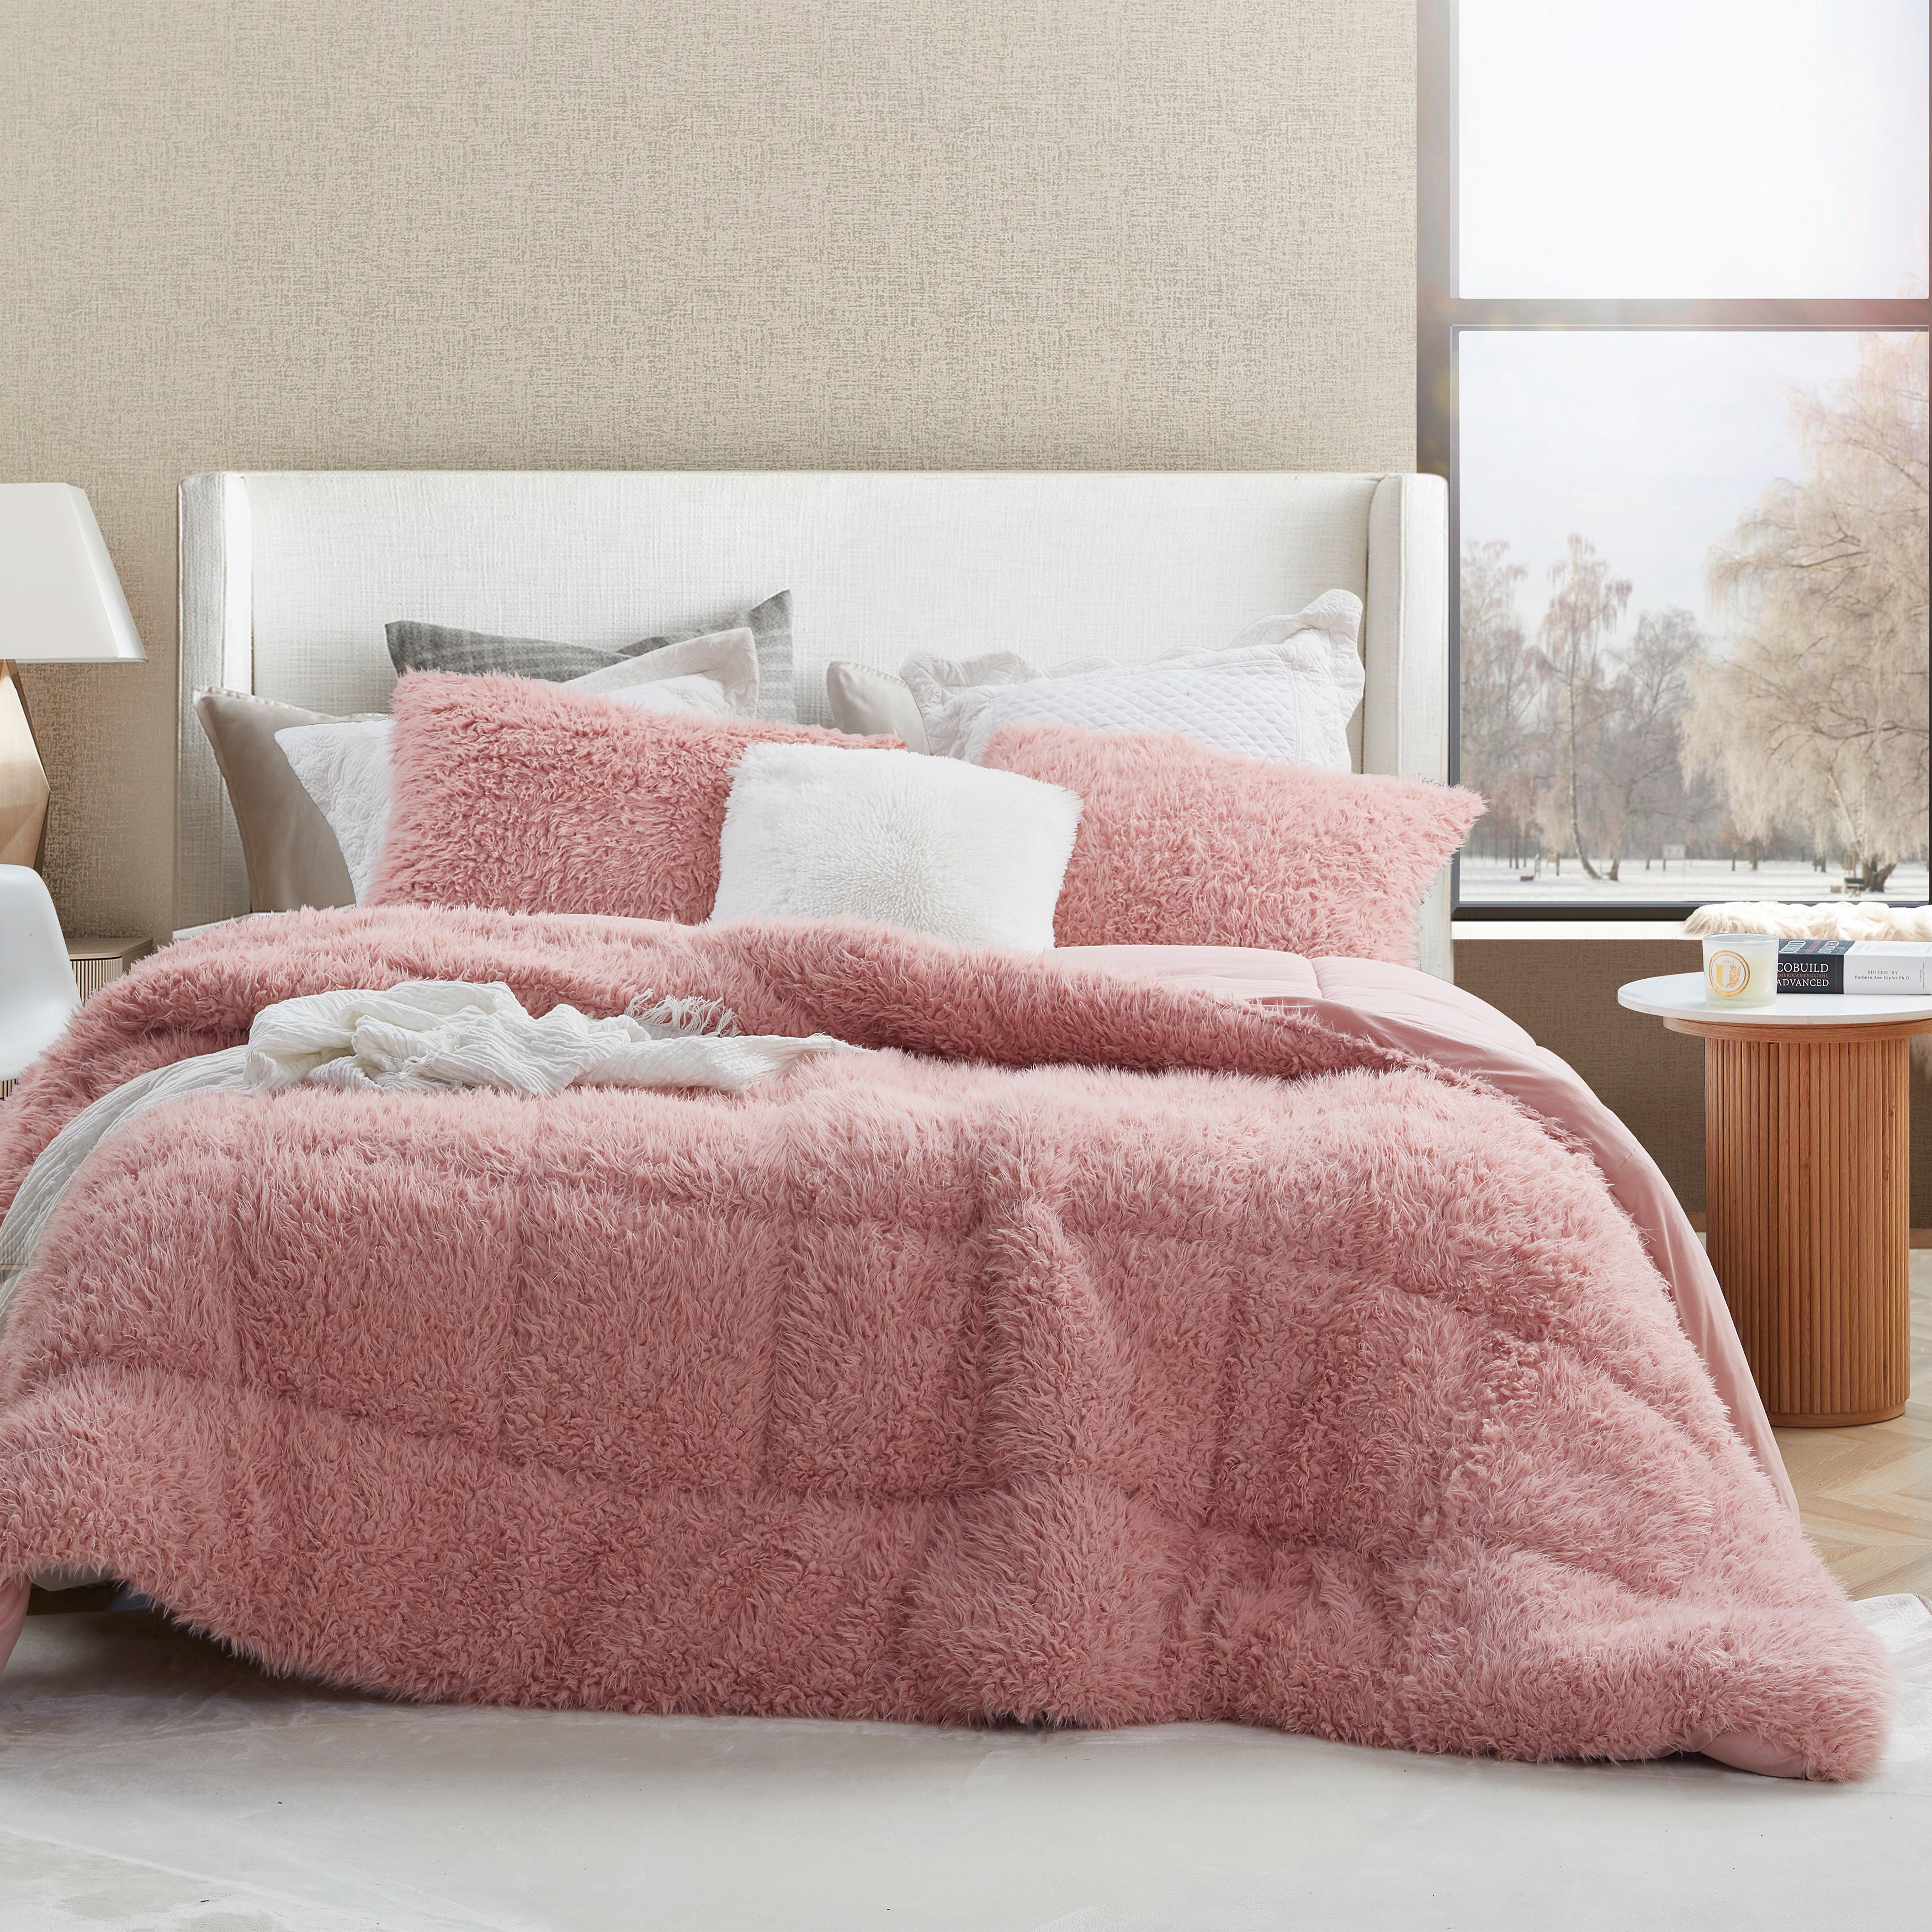 Queen of Sleep - Coma Inducer Oversized Comforter - Silver Pink